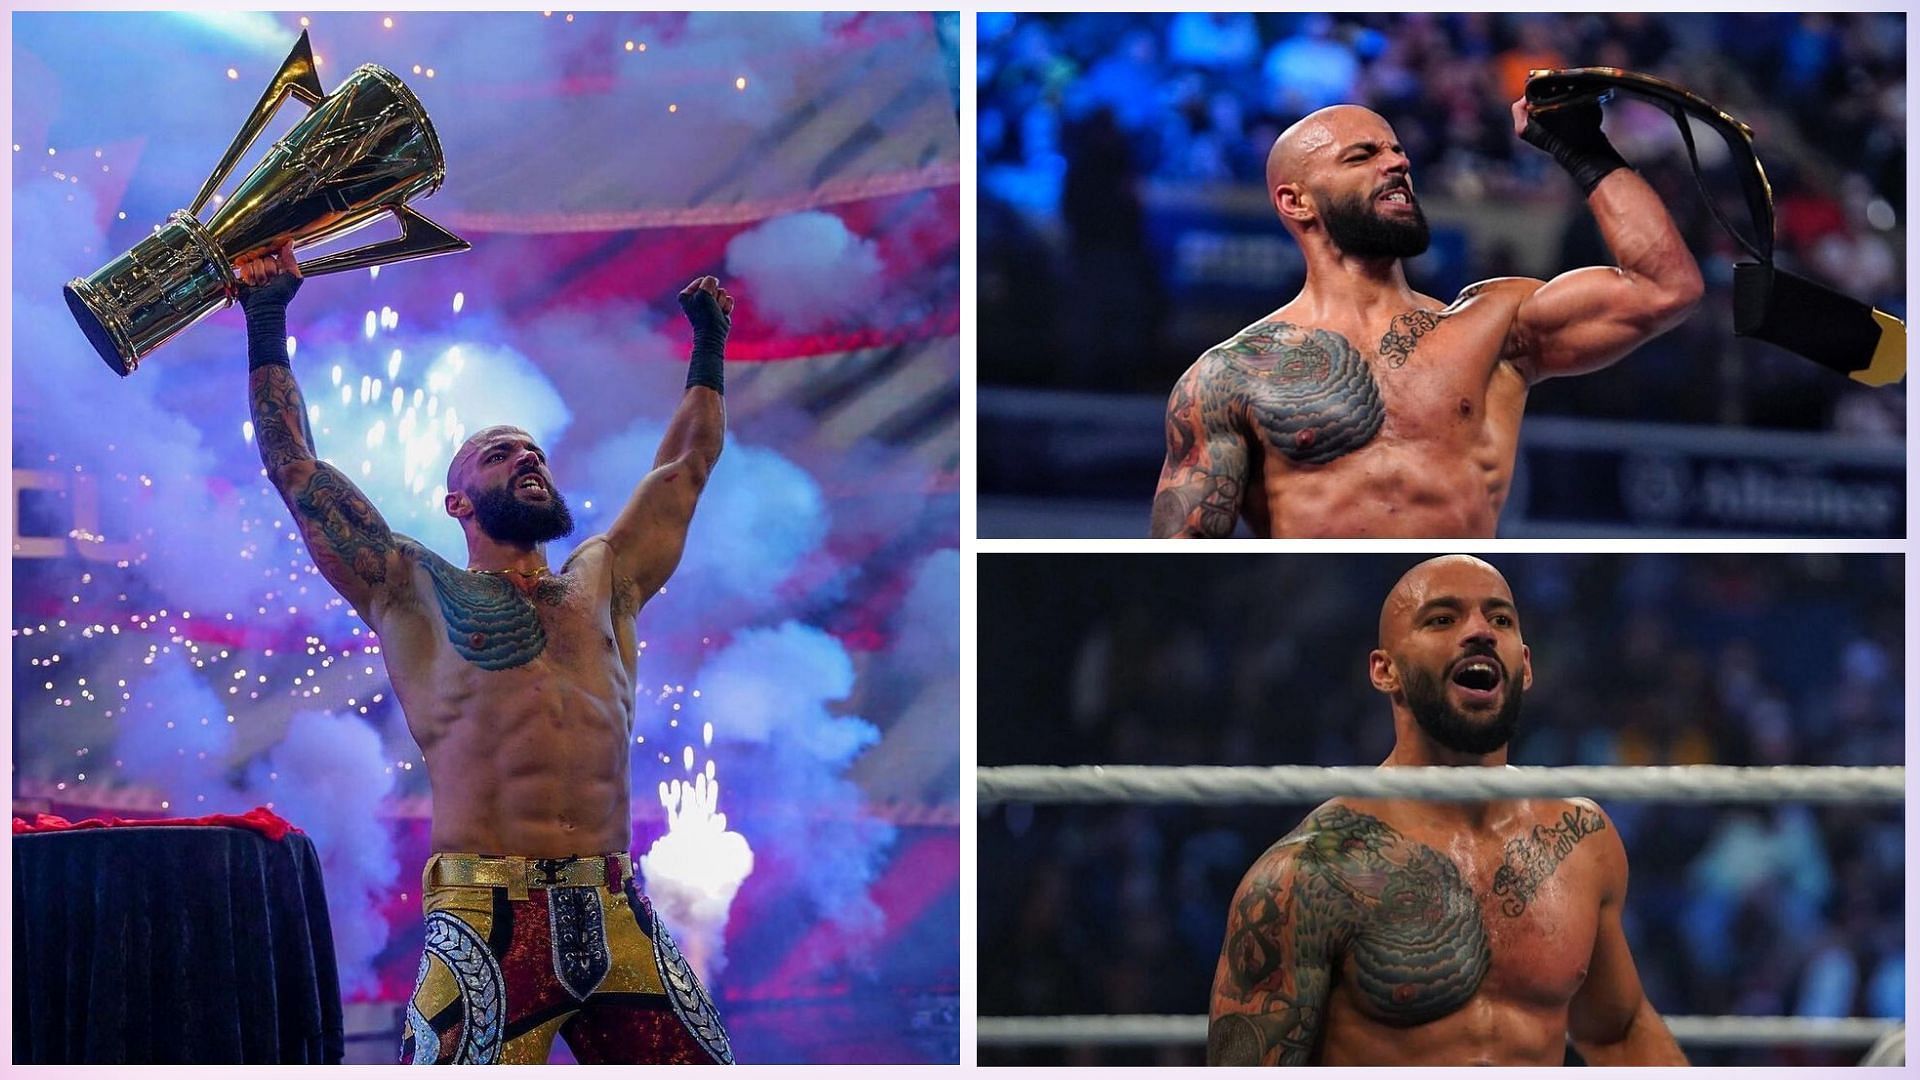 2023 could be the year for the high-flying WWE Superstar Ricochet.